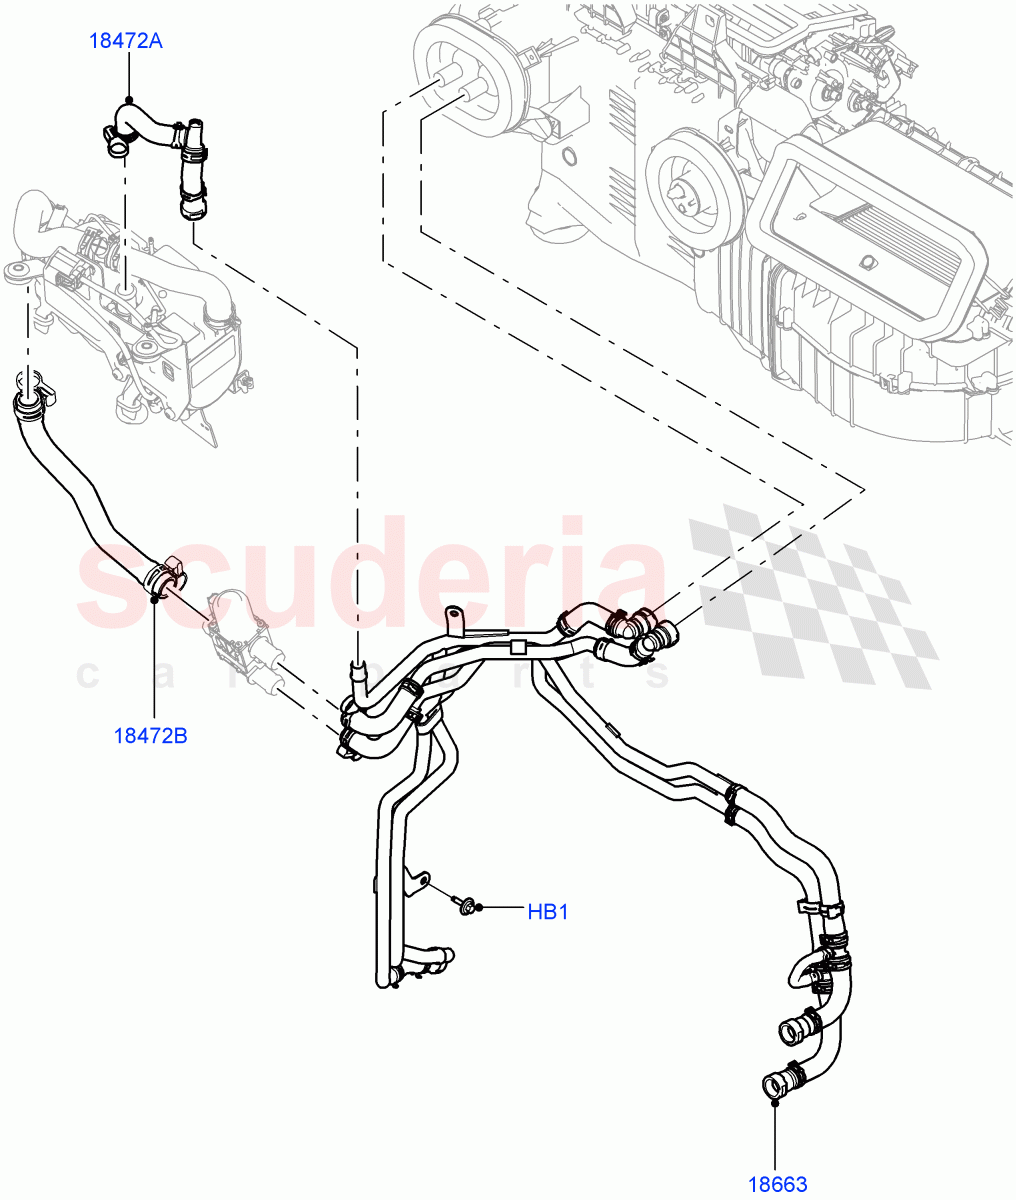 Heater Hoses(Solihull Plant Build)(2.0L I4 DSL MID DOHC AJ200,With Fuel Fired Heater,With Air Conditioning - Front/Rear,Park Heating With Remote Control,2.0L I4 DSL HIGH DOHC AJ200)((V)FROMHA000001,(V)TOHA999999) of Land Rover Land Rover Discovery 5 (2017+) [3.0 I6 Turbo Diesel AJ20D6]